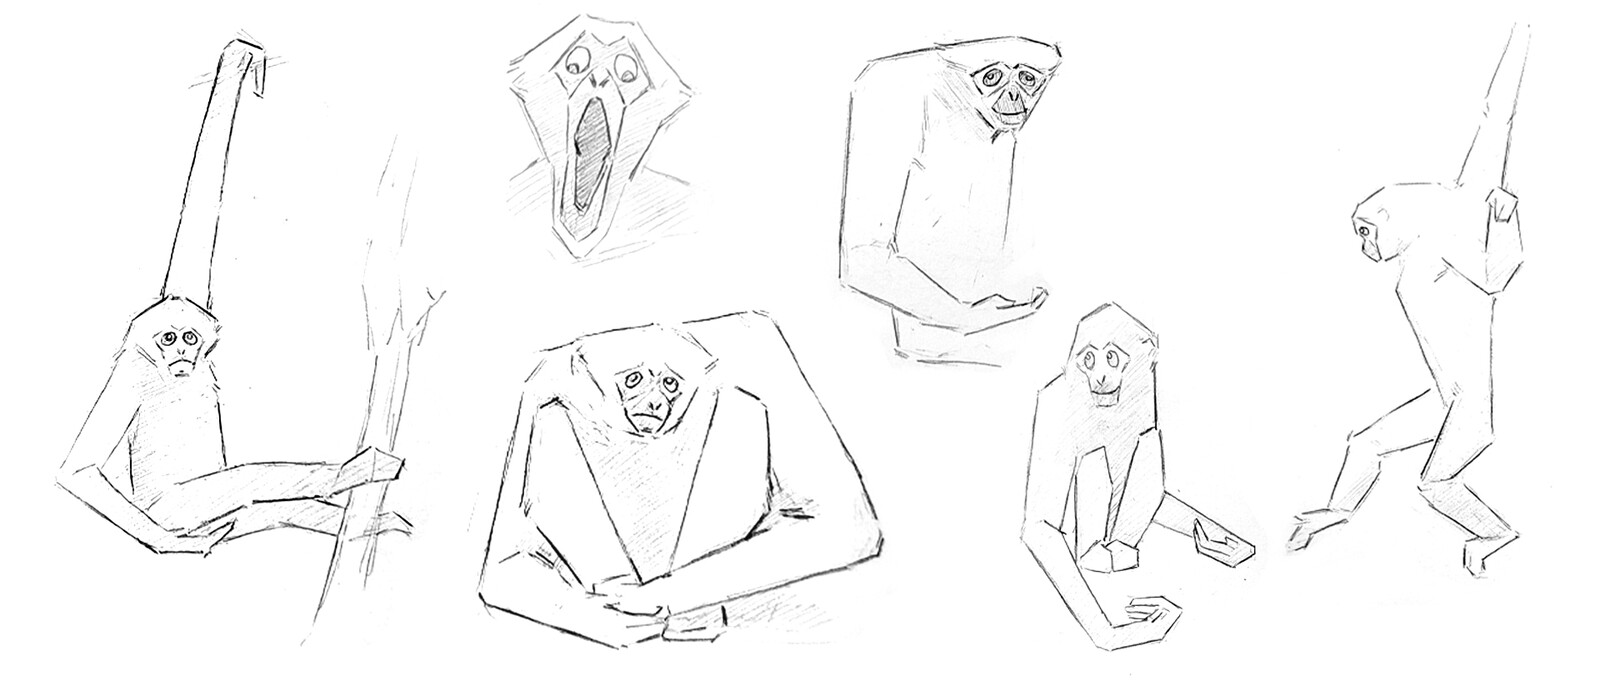 Gibbons-Stylized drawing sketches